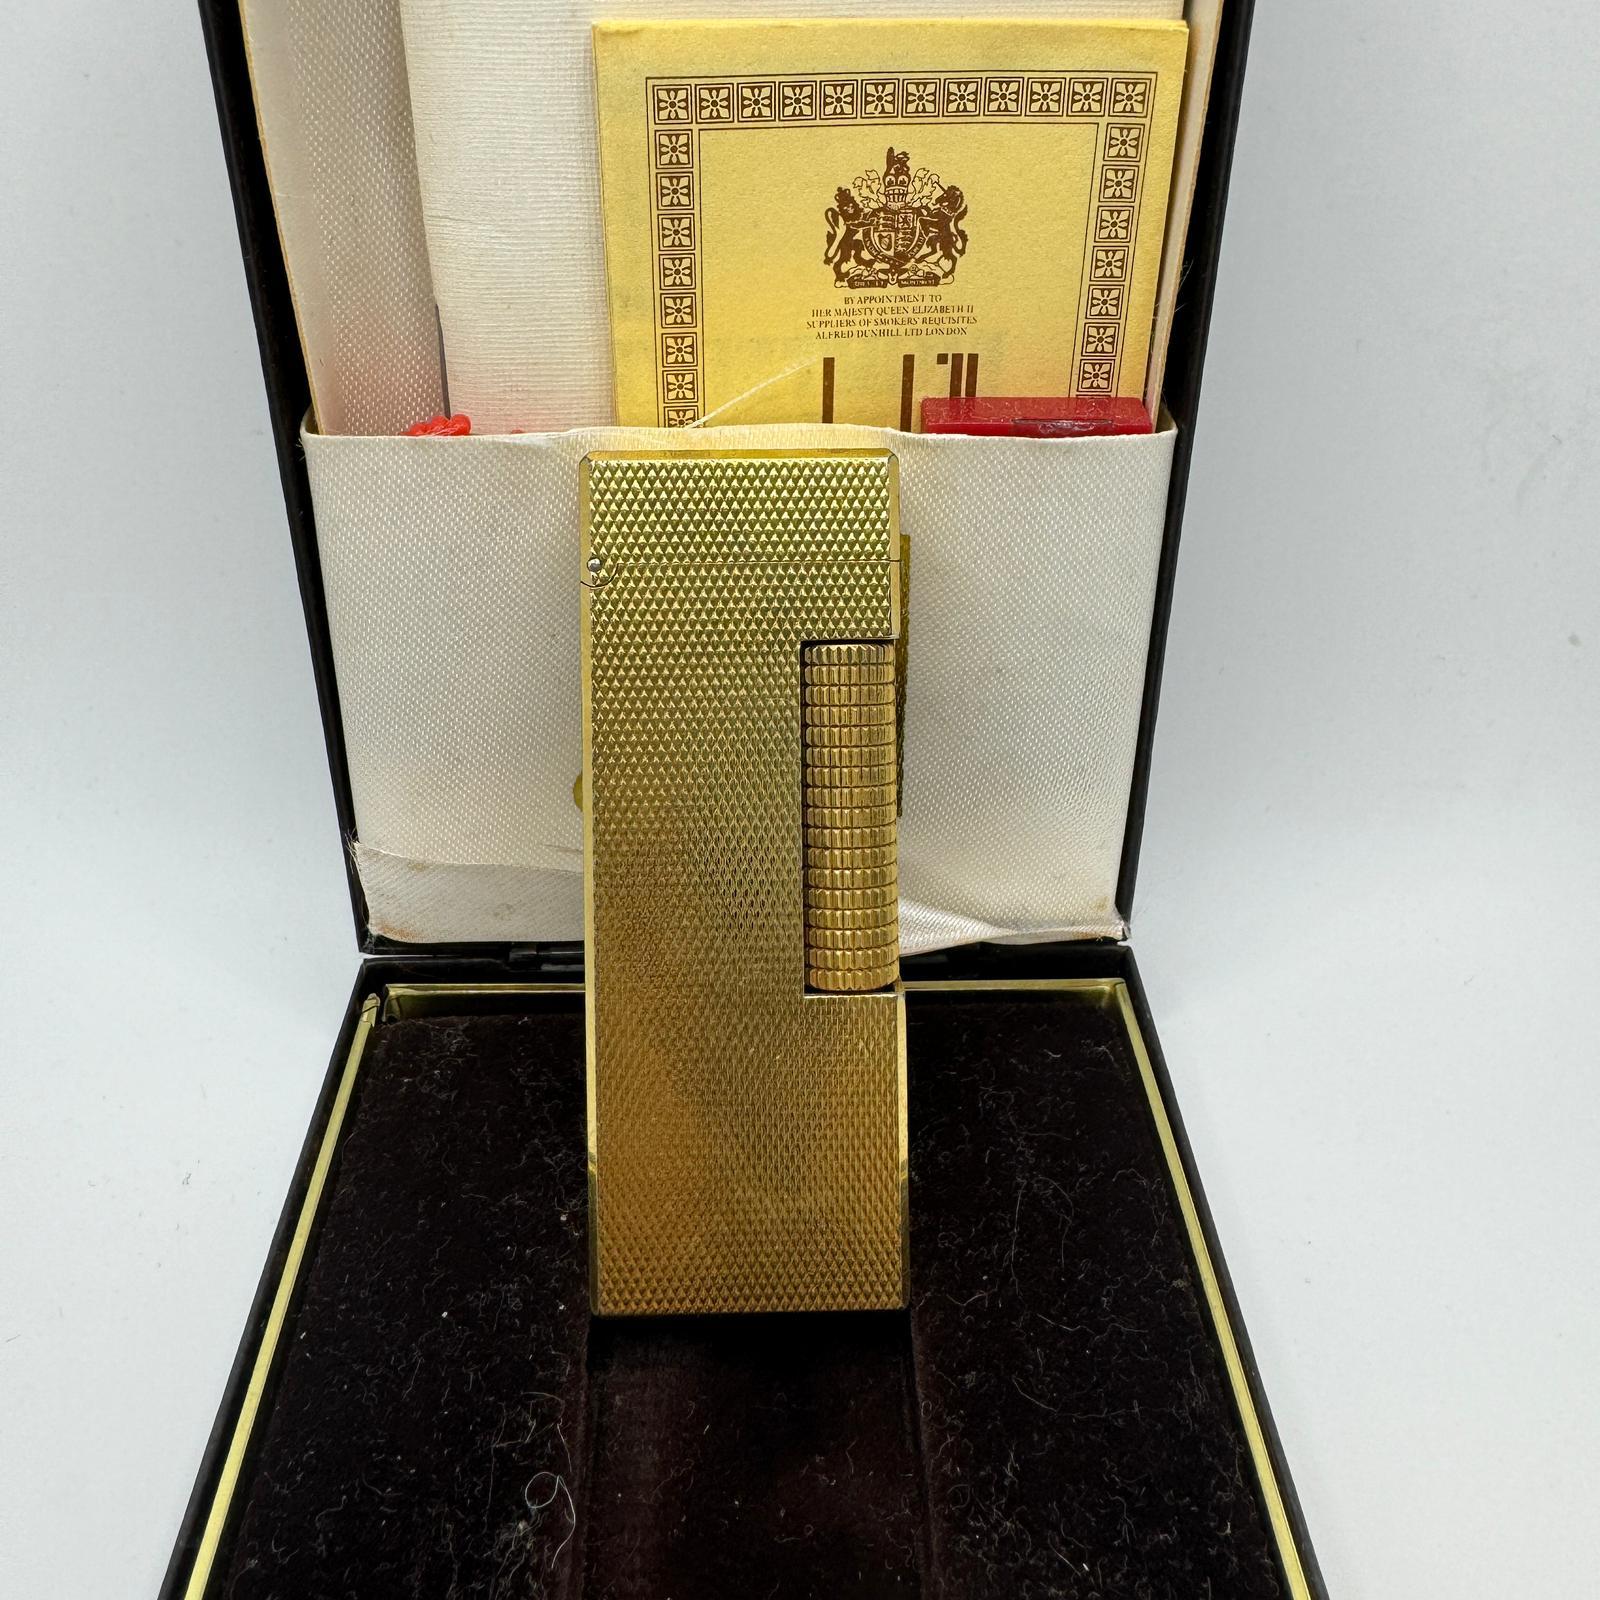 Rare Iconic Vintage and Elegant Dunhill 18K Gold Plated 
Circa 1980s 
Swiss Made Lighter
The James Bond lighter of choice 
In mint condition.
Works perfectly. 
Iconic and beautifully engineered piece in rare condition.
In original BRITISH Case with